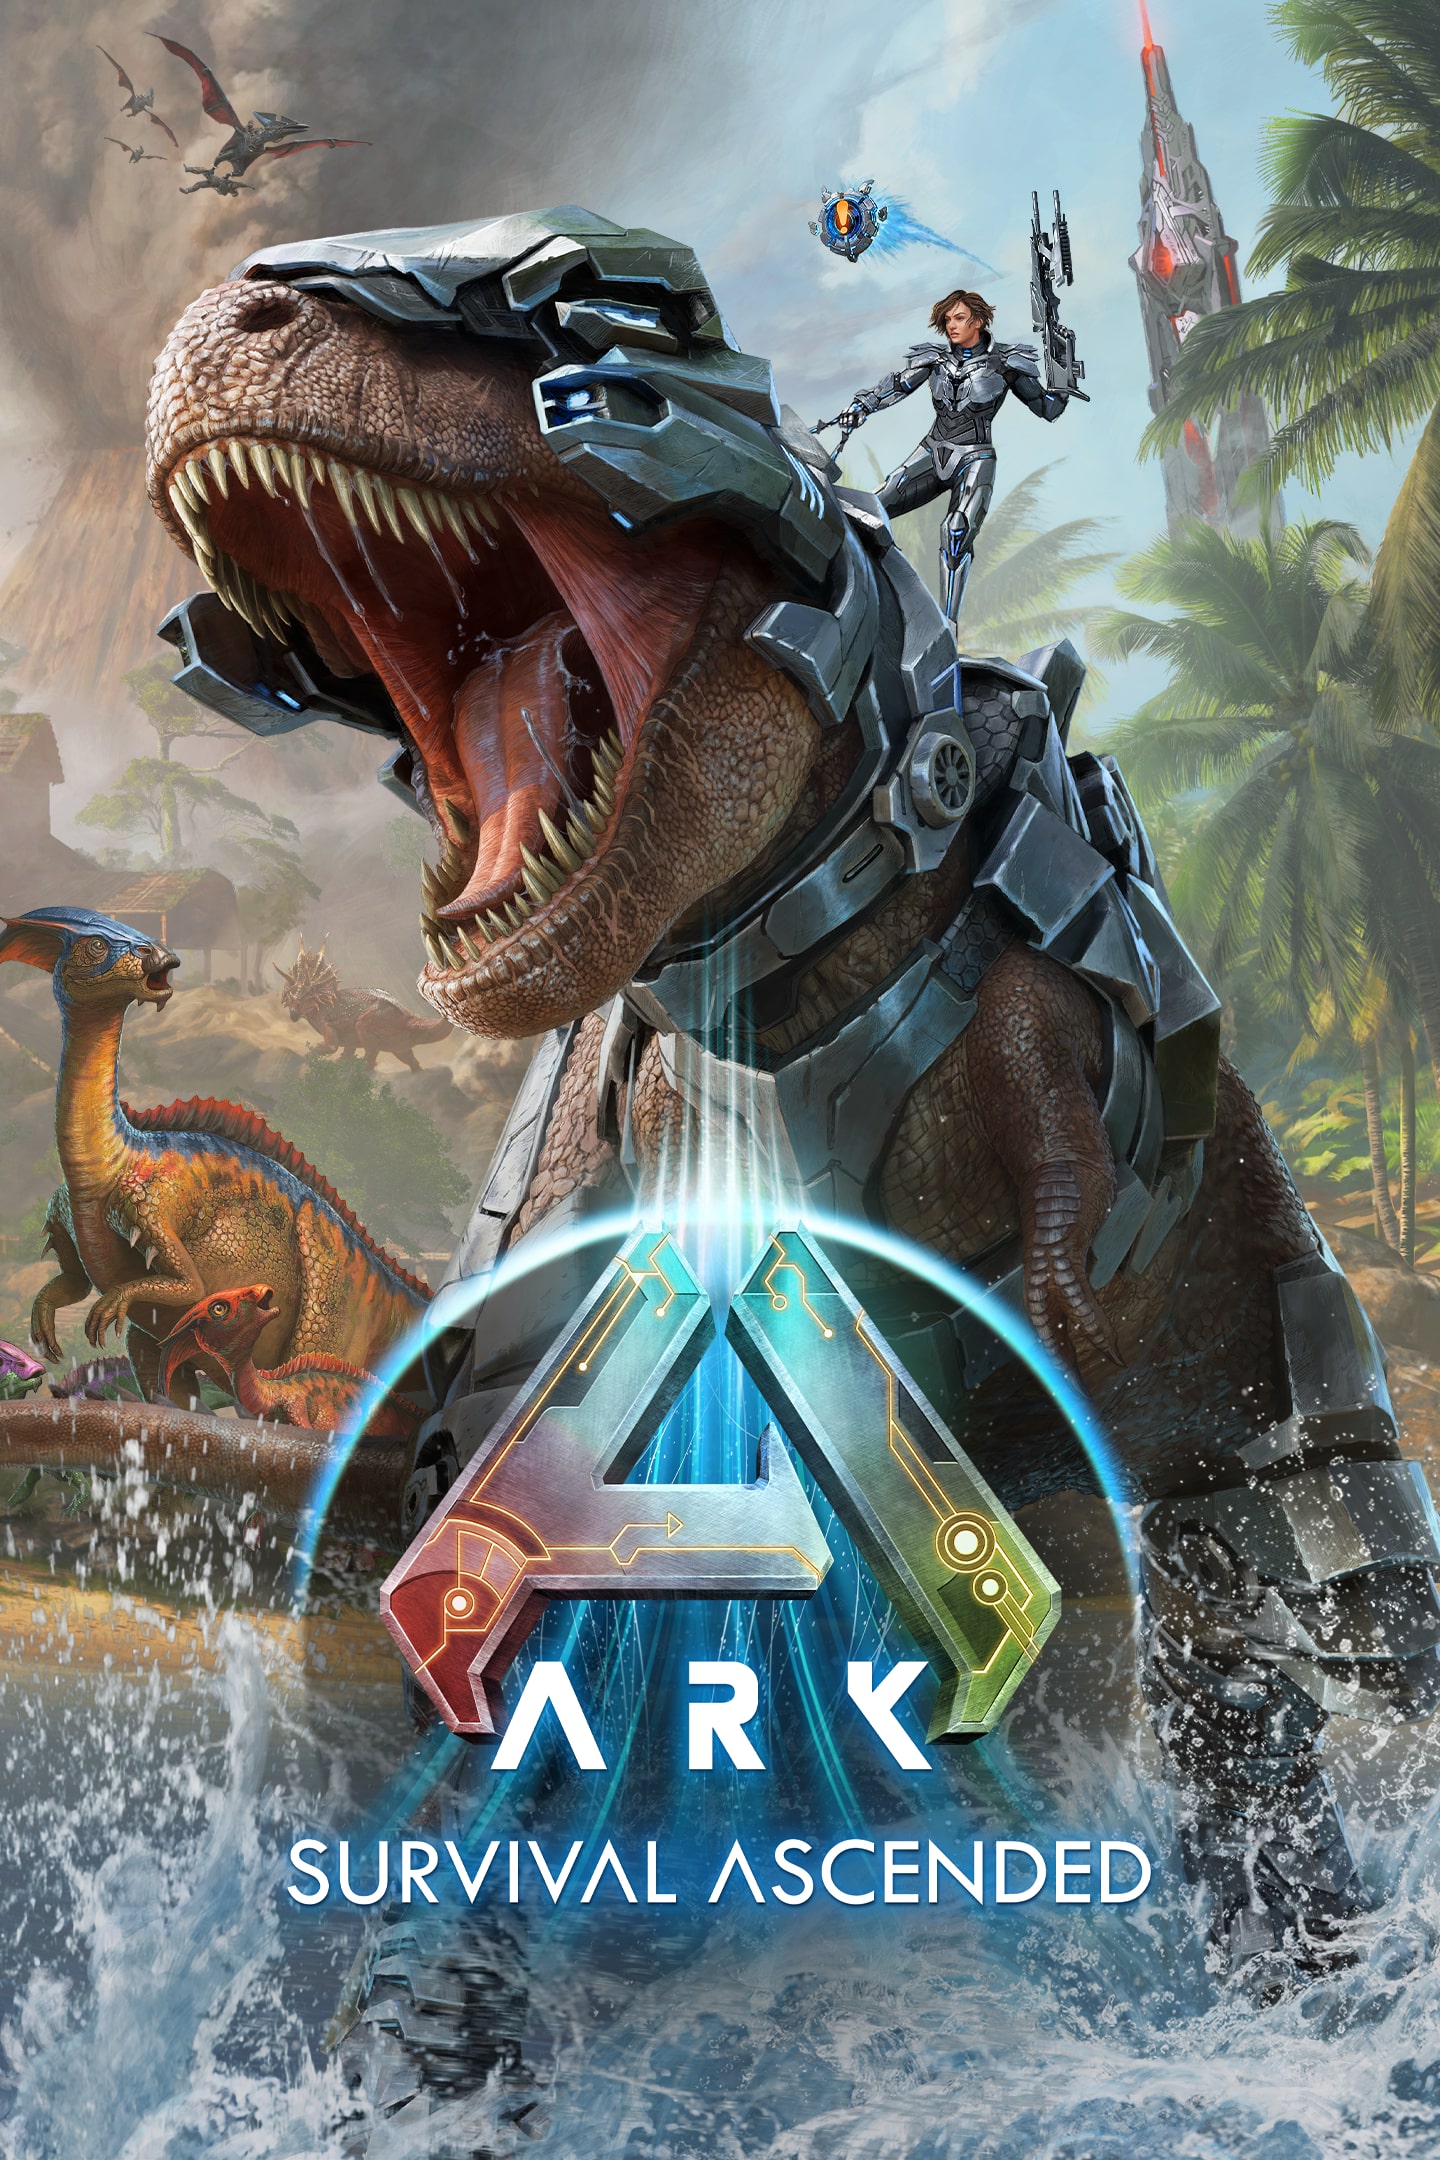 When is ARK: Survival Ascended Coming to Consoles? - Siliconera